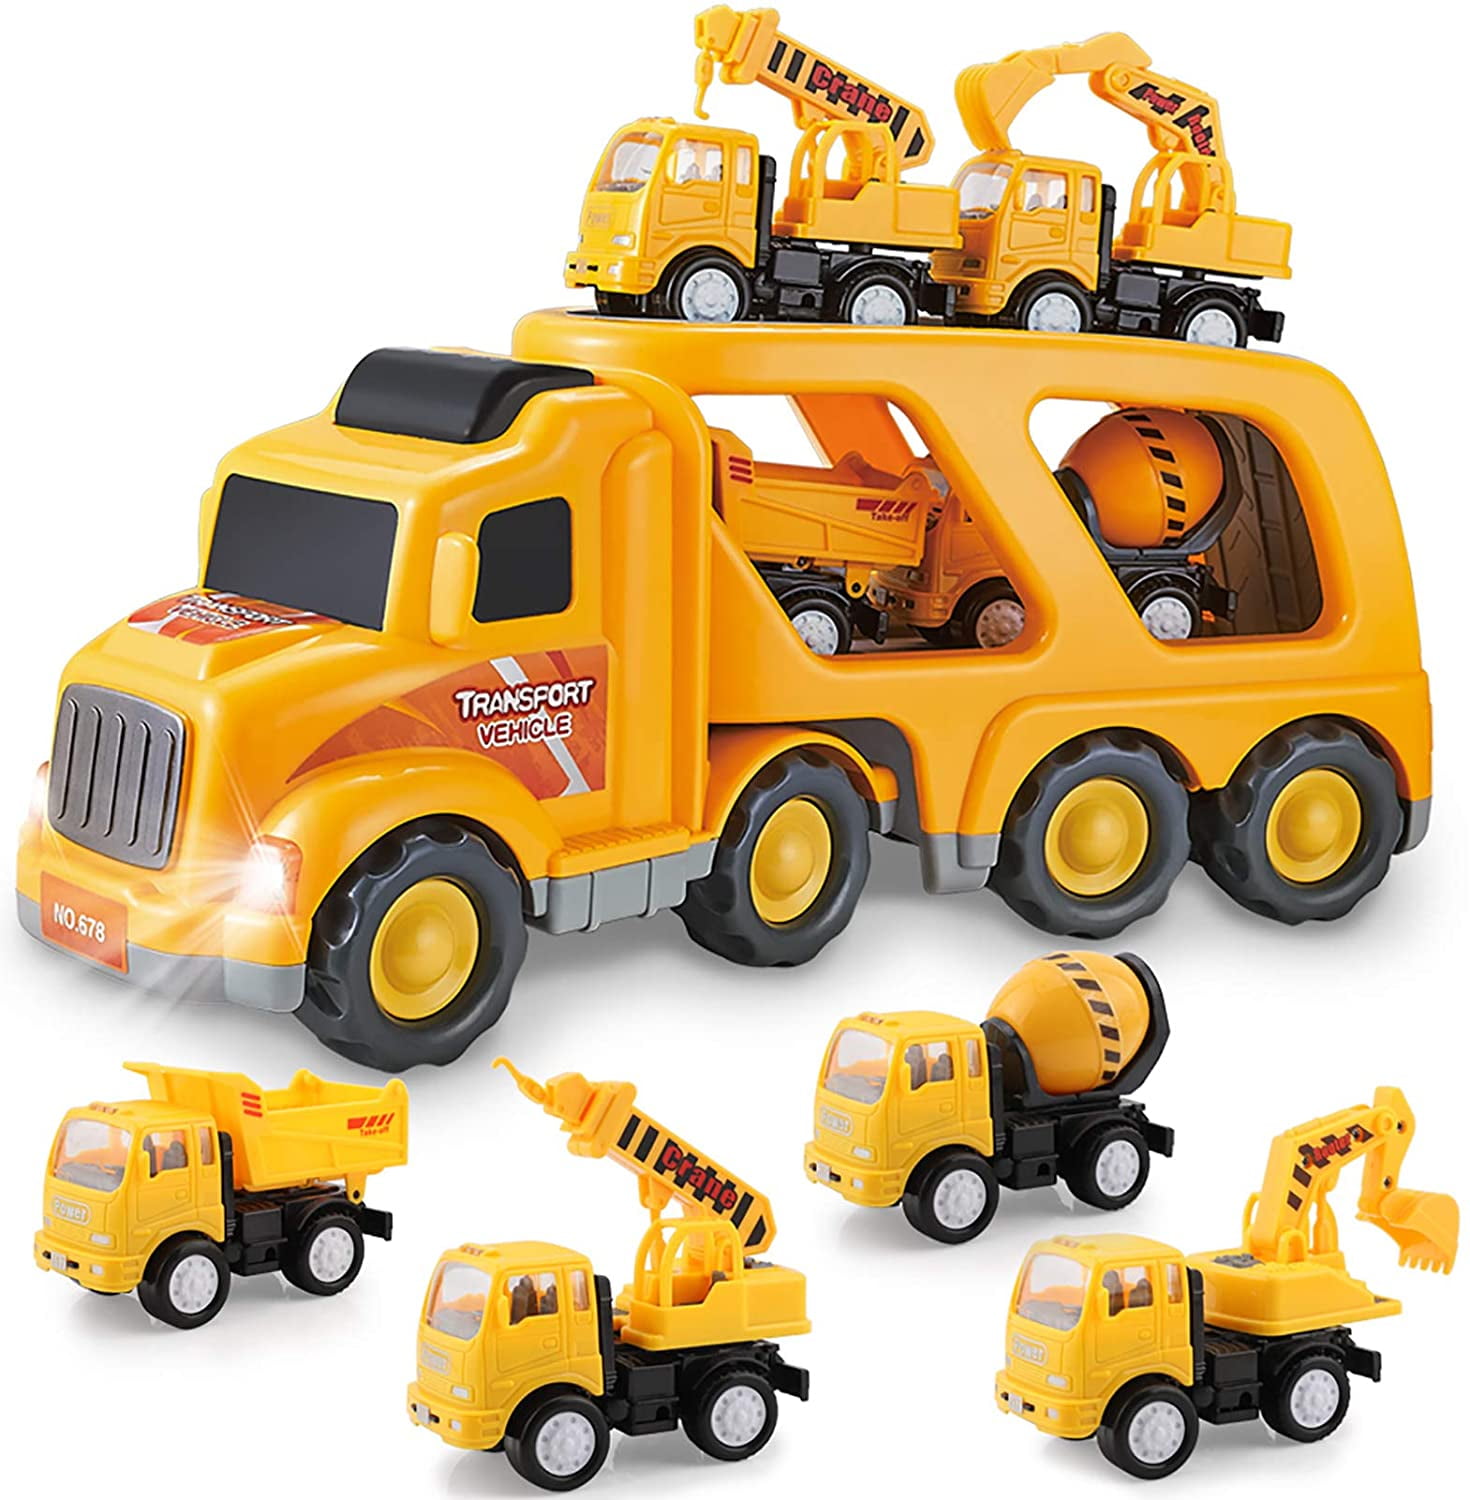 Engineering Construction Truck Excavator Digger Vehicle Car Kids Toy Gift AA Top 